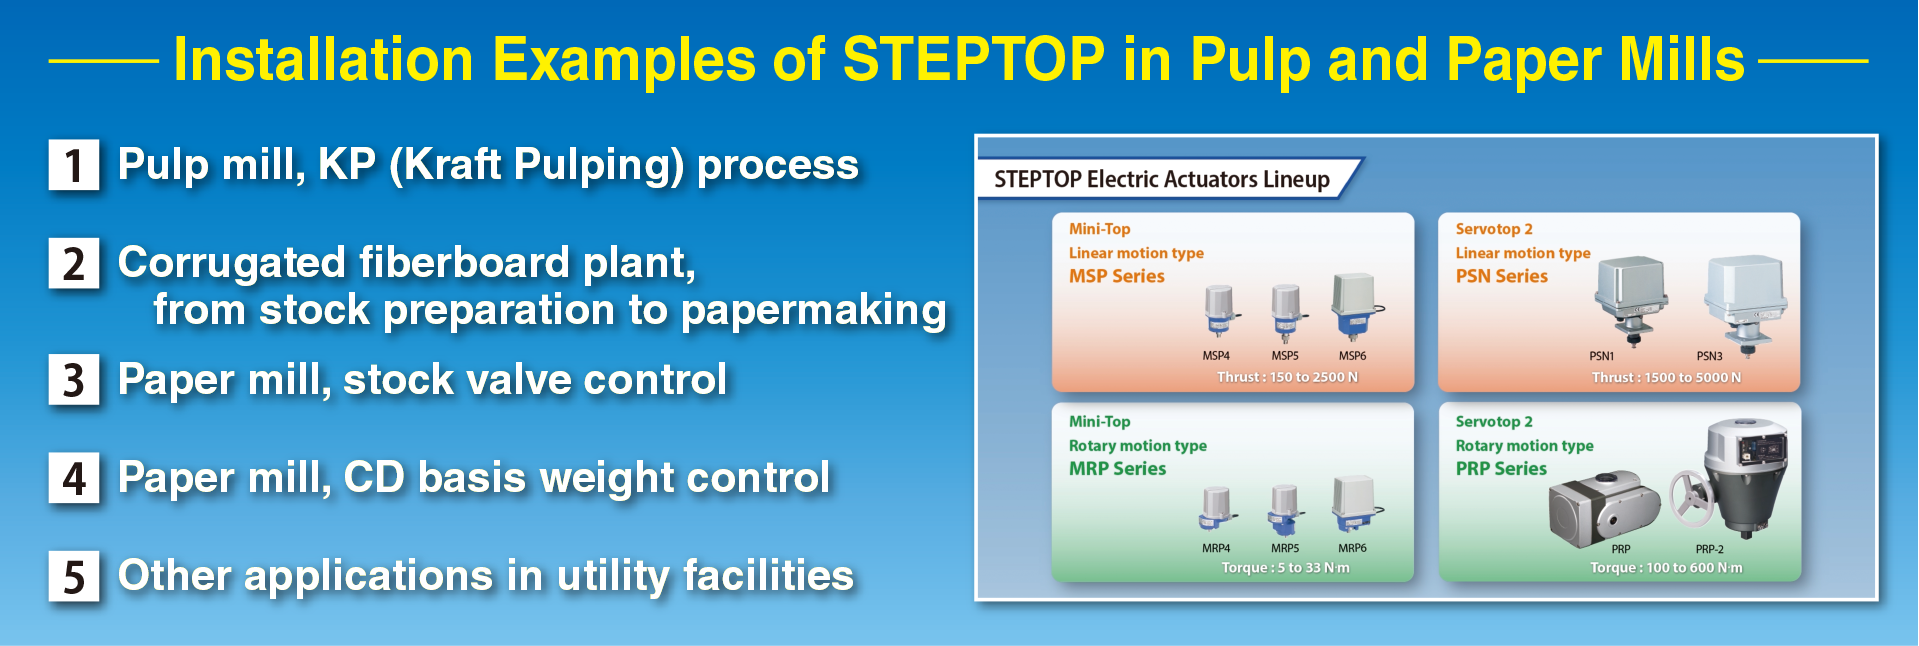 Installation Examples of STEPTOP in Pulp and Paper Mills